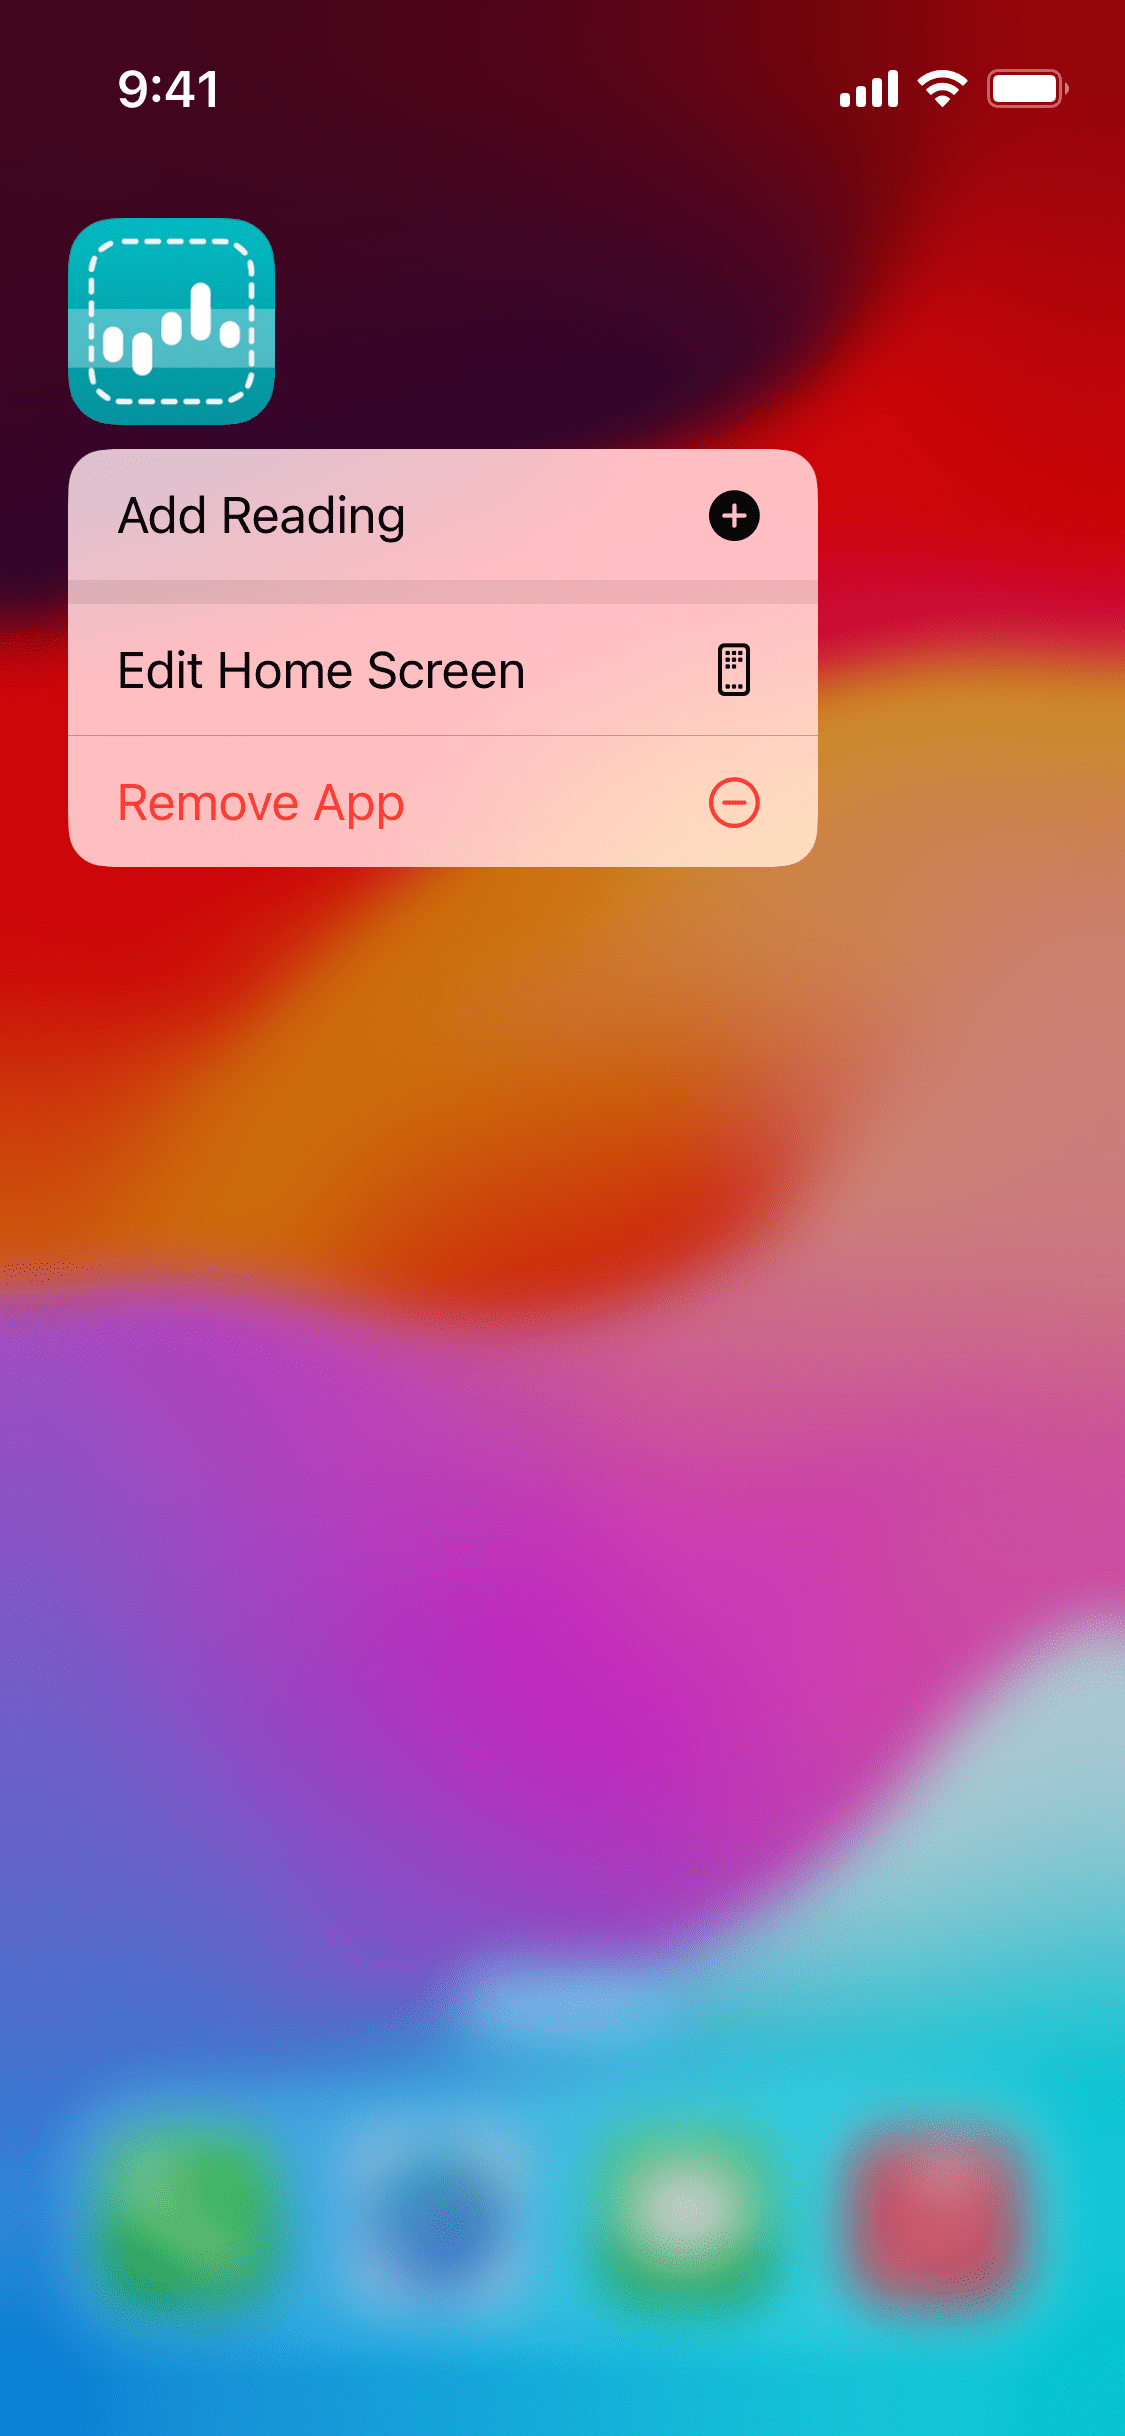 Screenshot of the shortcut showing on the app icon